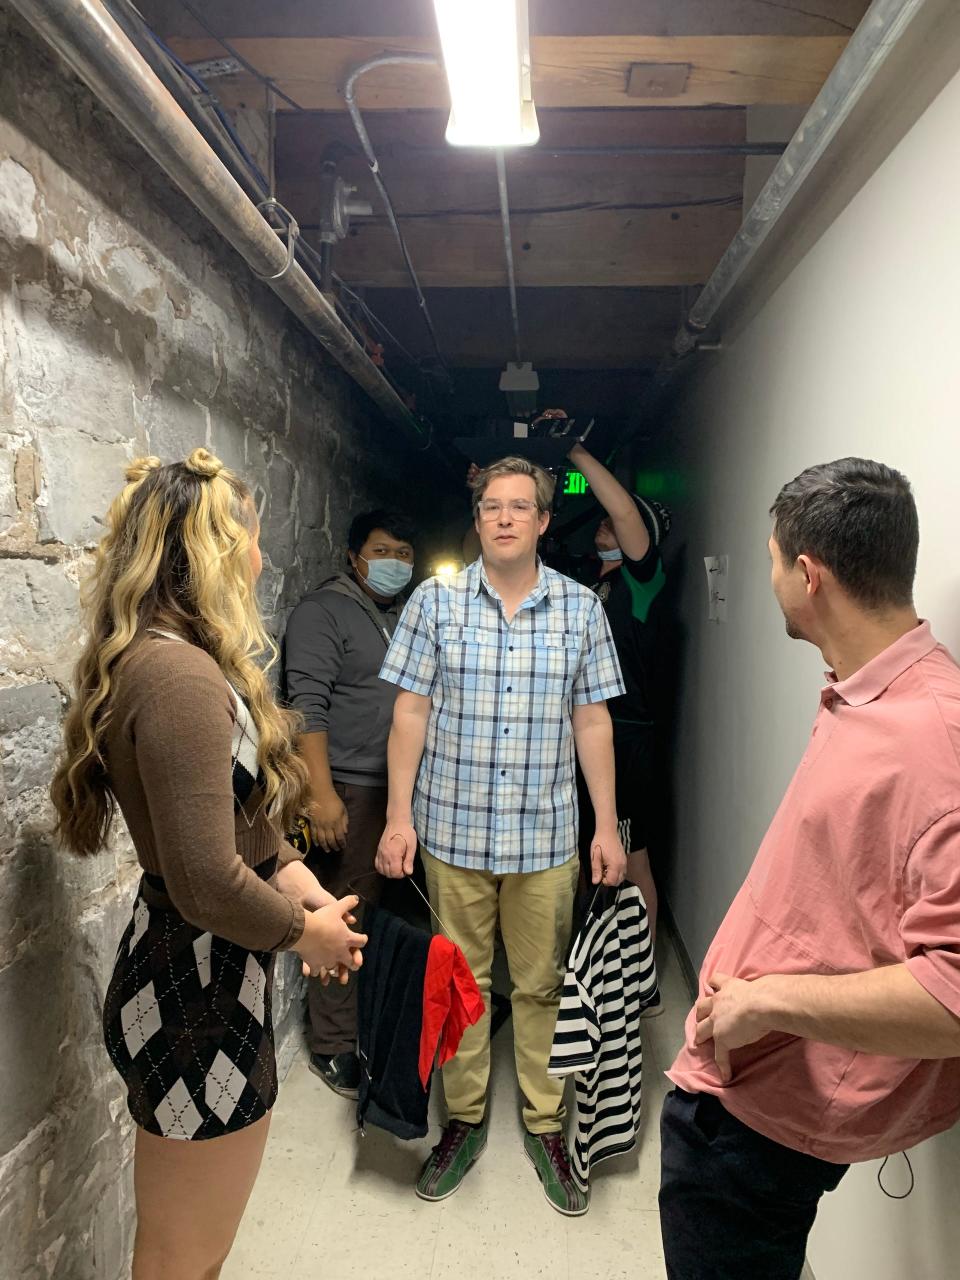 Chloe Skoczen (Courtney), John Carlo Rosillo (1st assistant camera), Orleans resident Joshua Koopman (Michael), Spencer Ortega (cinematographer), Jesse James Montoya (Corey) on the set of "Earlybird," a comedy film about community theater that will be available for screening starting this week.